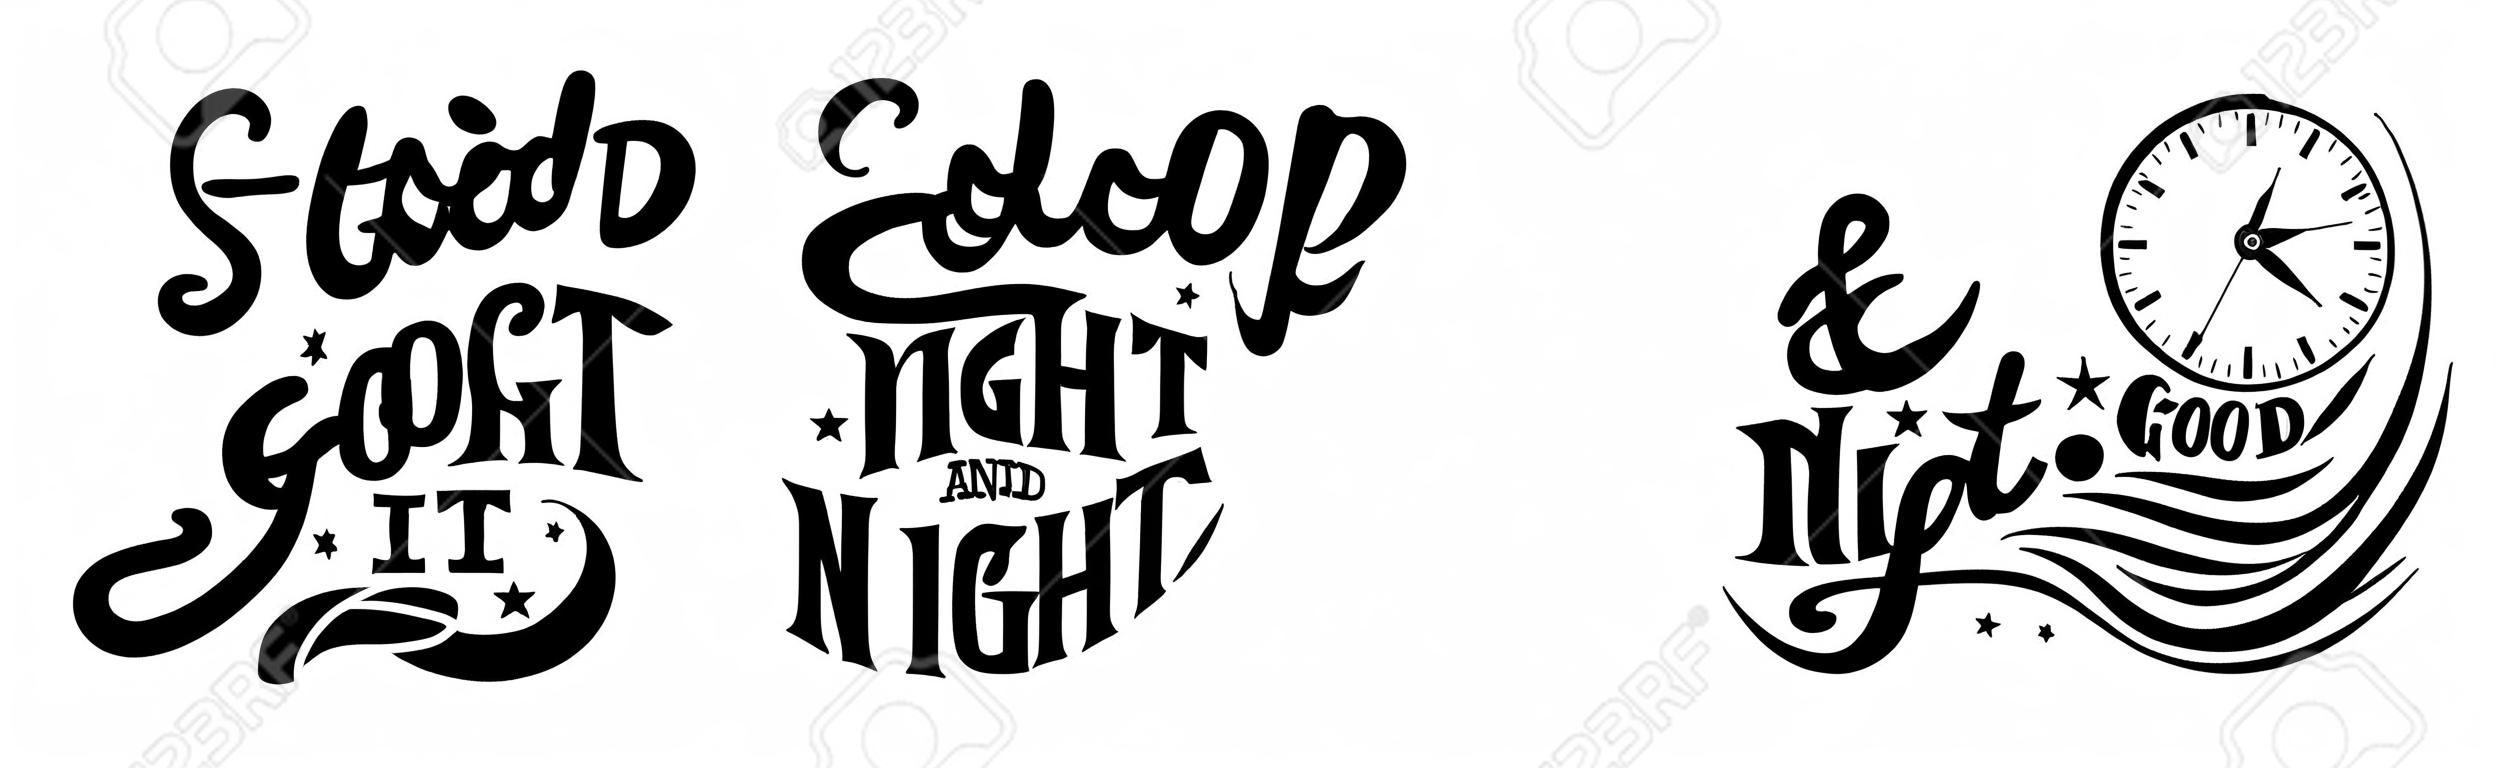 Lettering Slogan about sleep and good night. Vector illustration design for graphics, prints, posters, cards, stickers and other creative uses